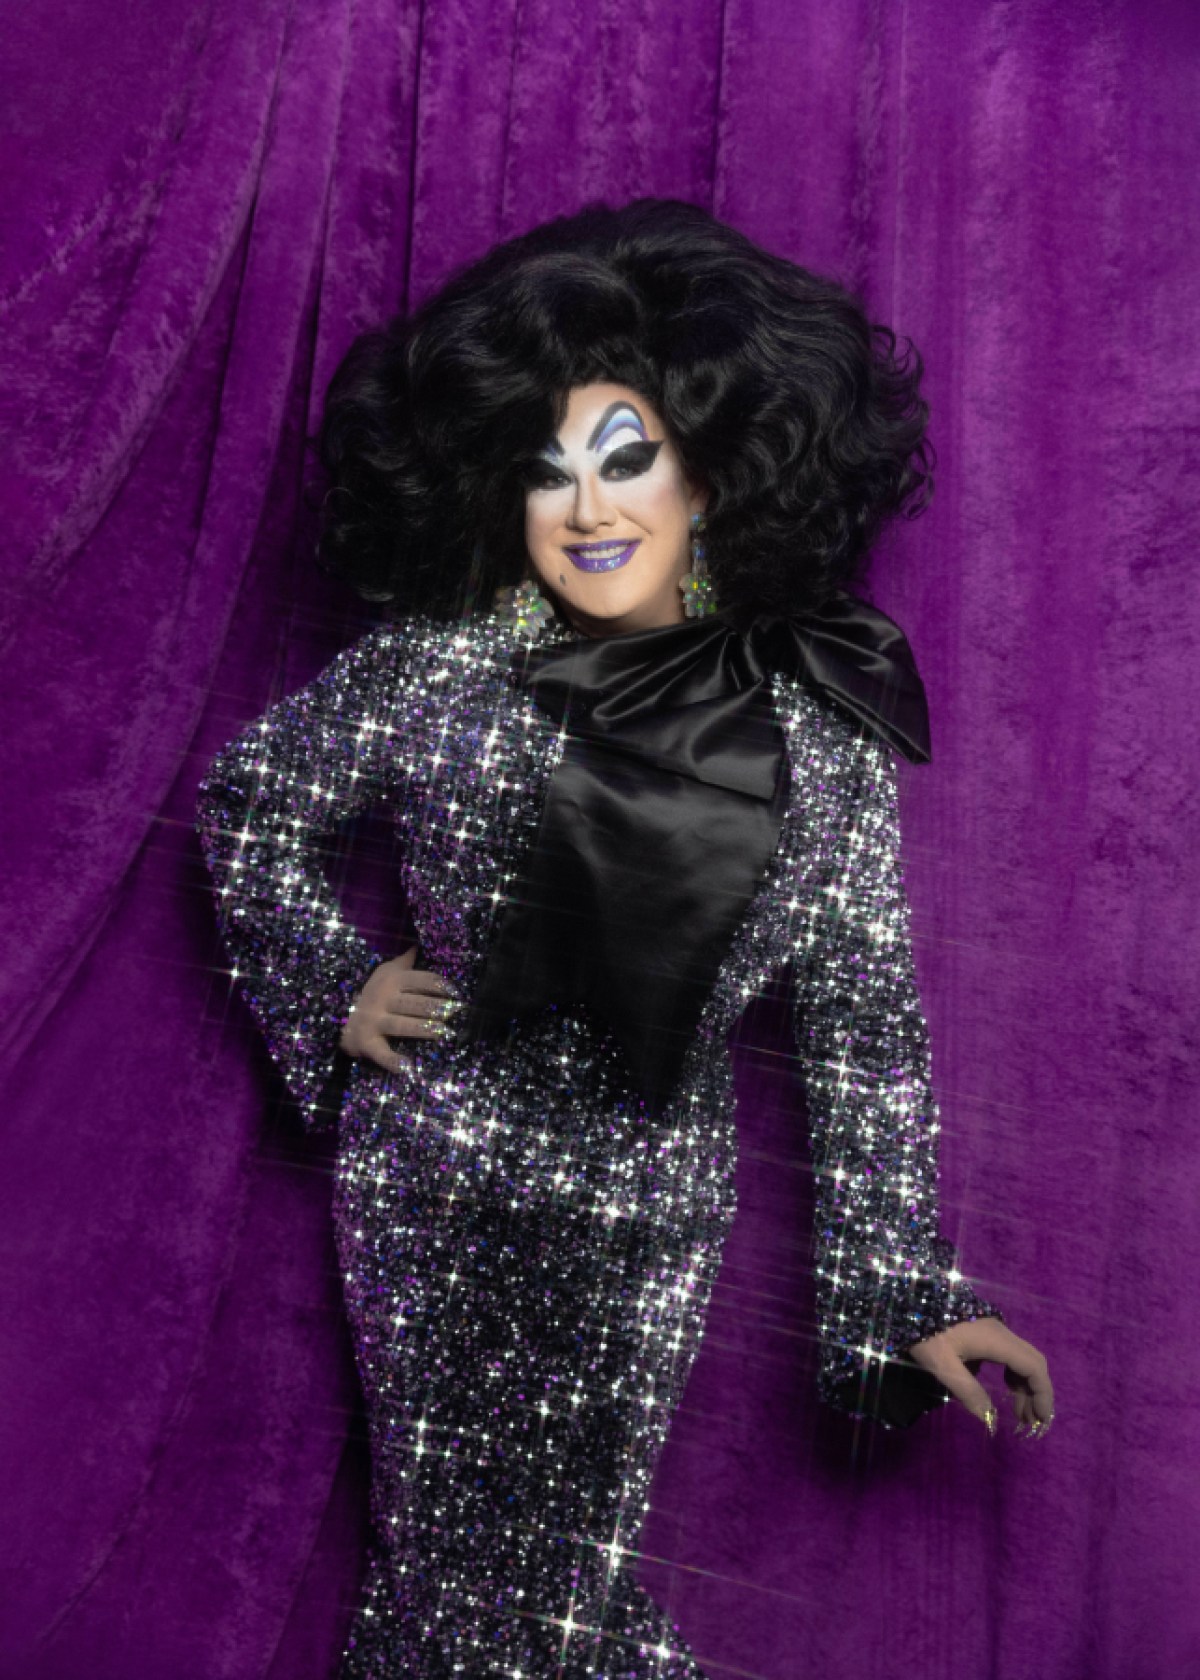 Peaches Christ in a sparkling black dress poses in front of a purple background